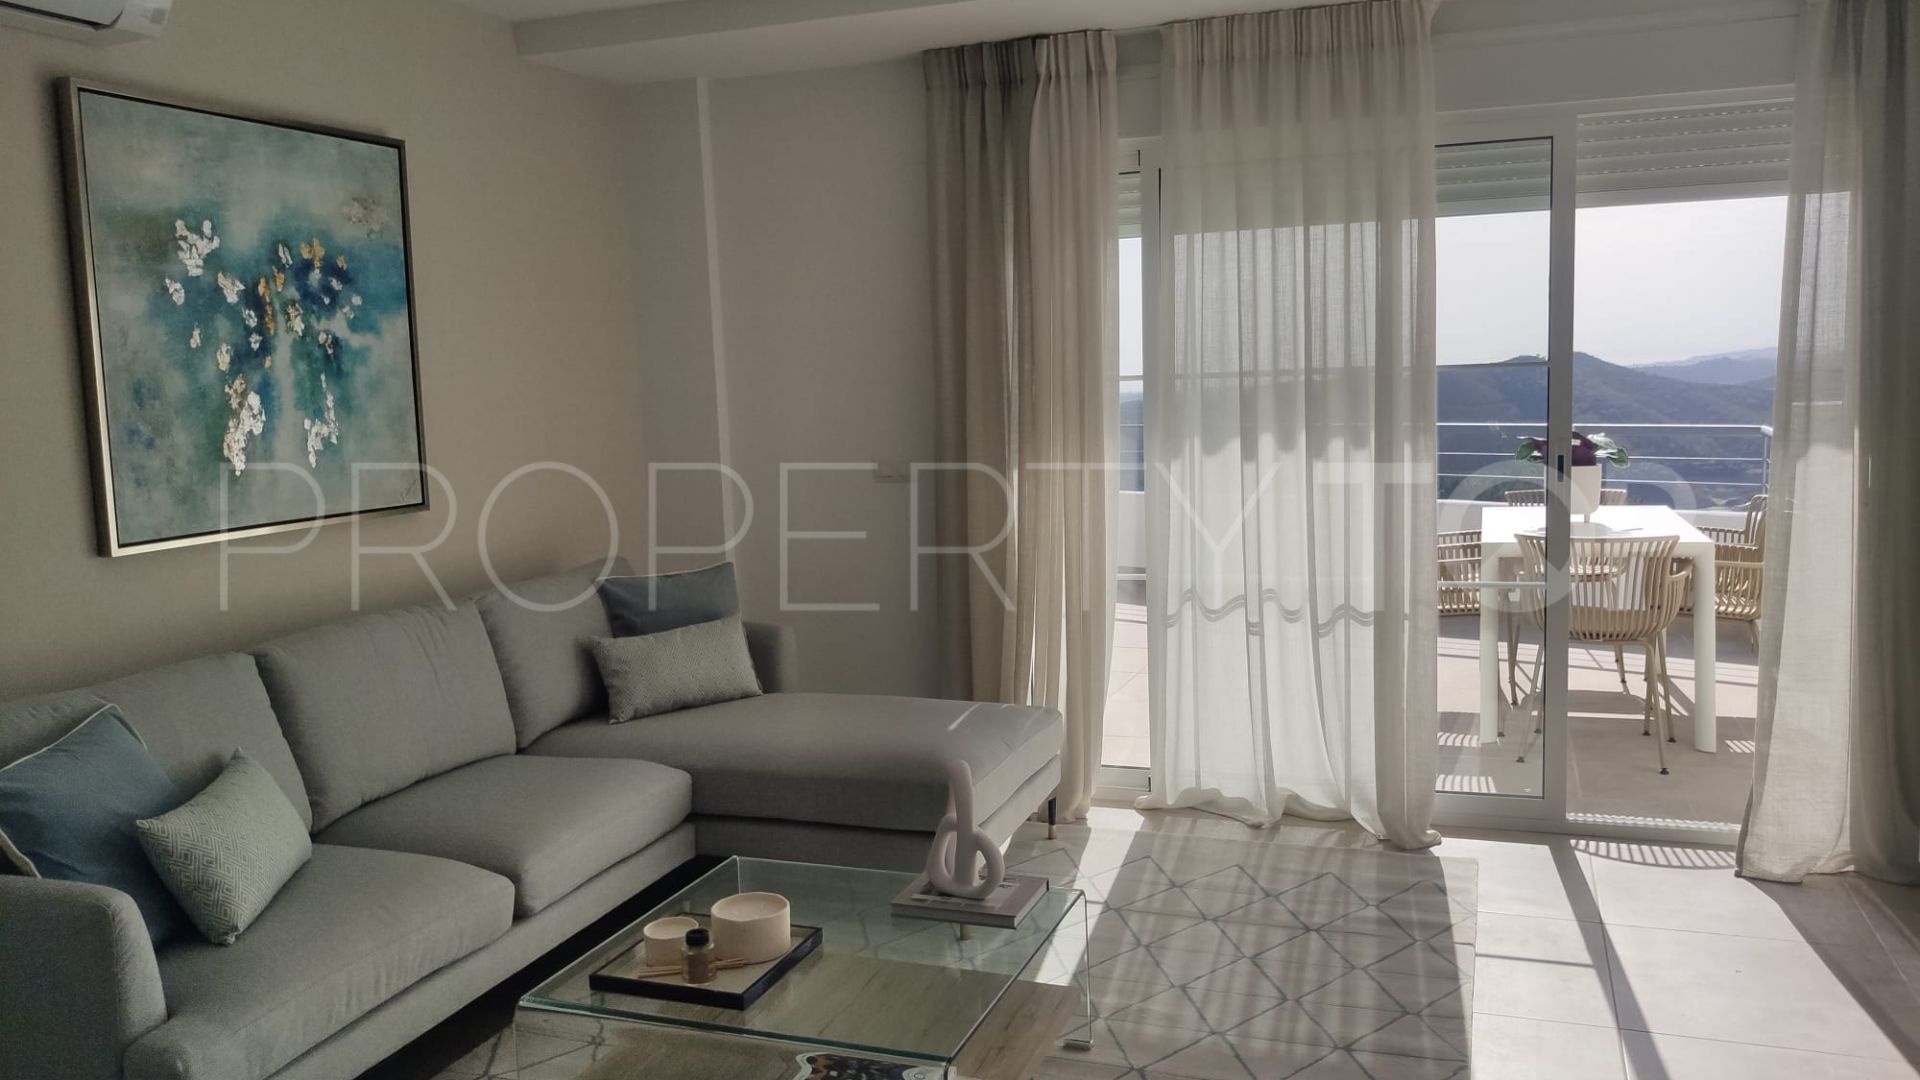 For sale apartment in Istan